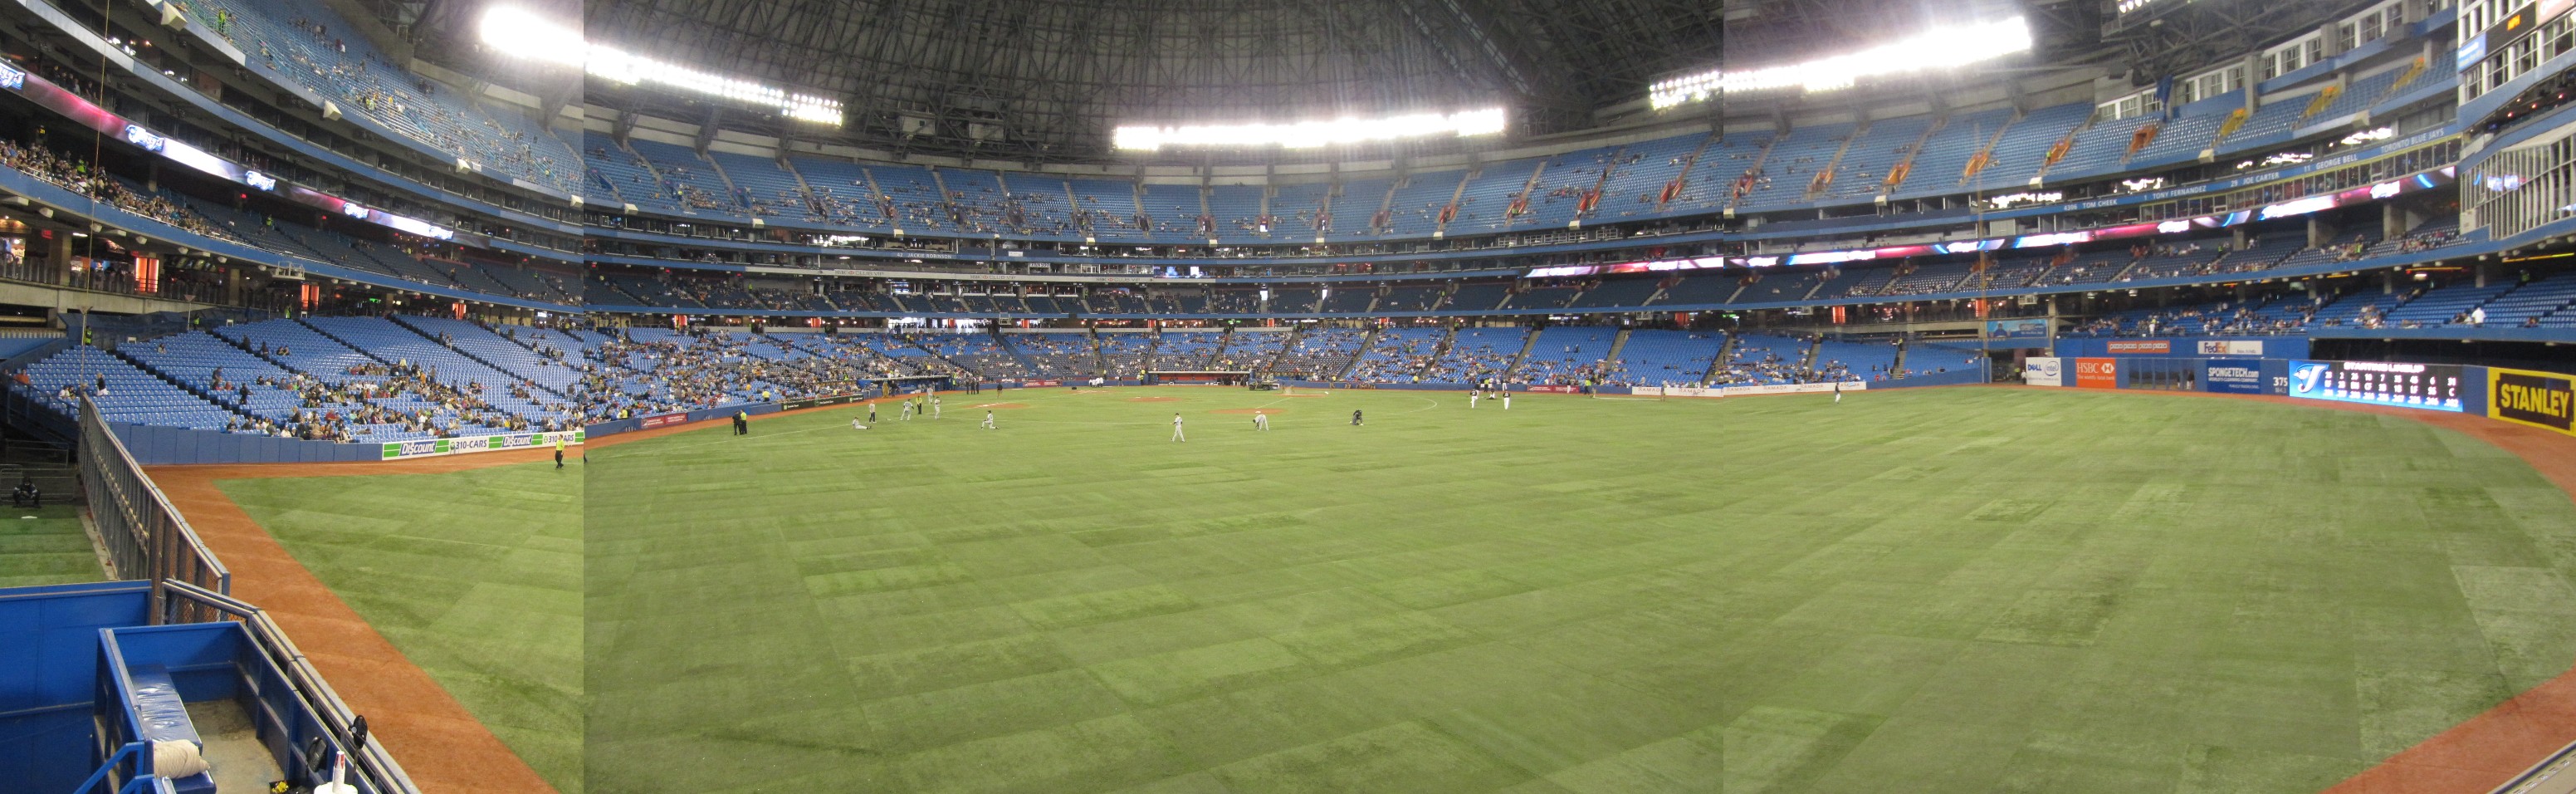 Rogers Centre Section 113d Corner Spot Panorama